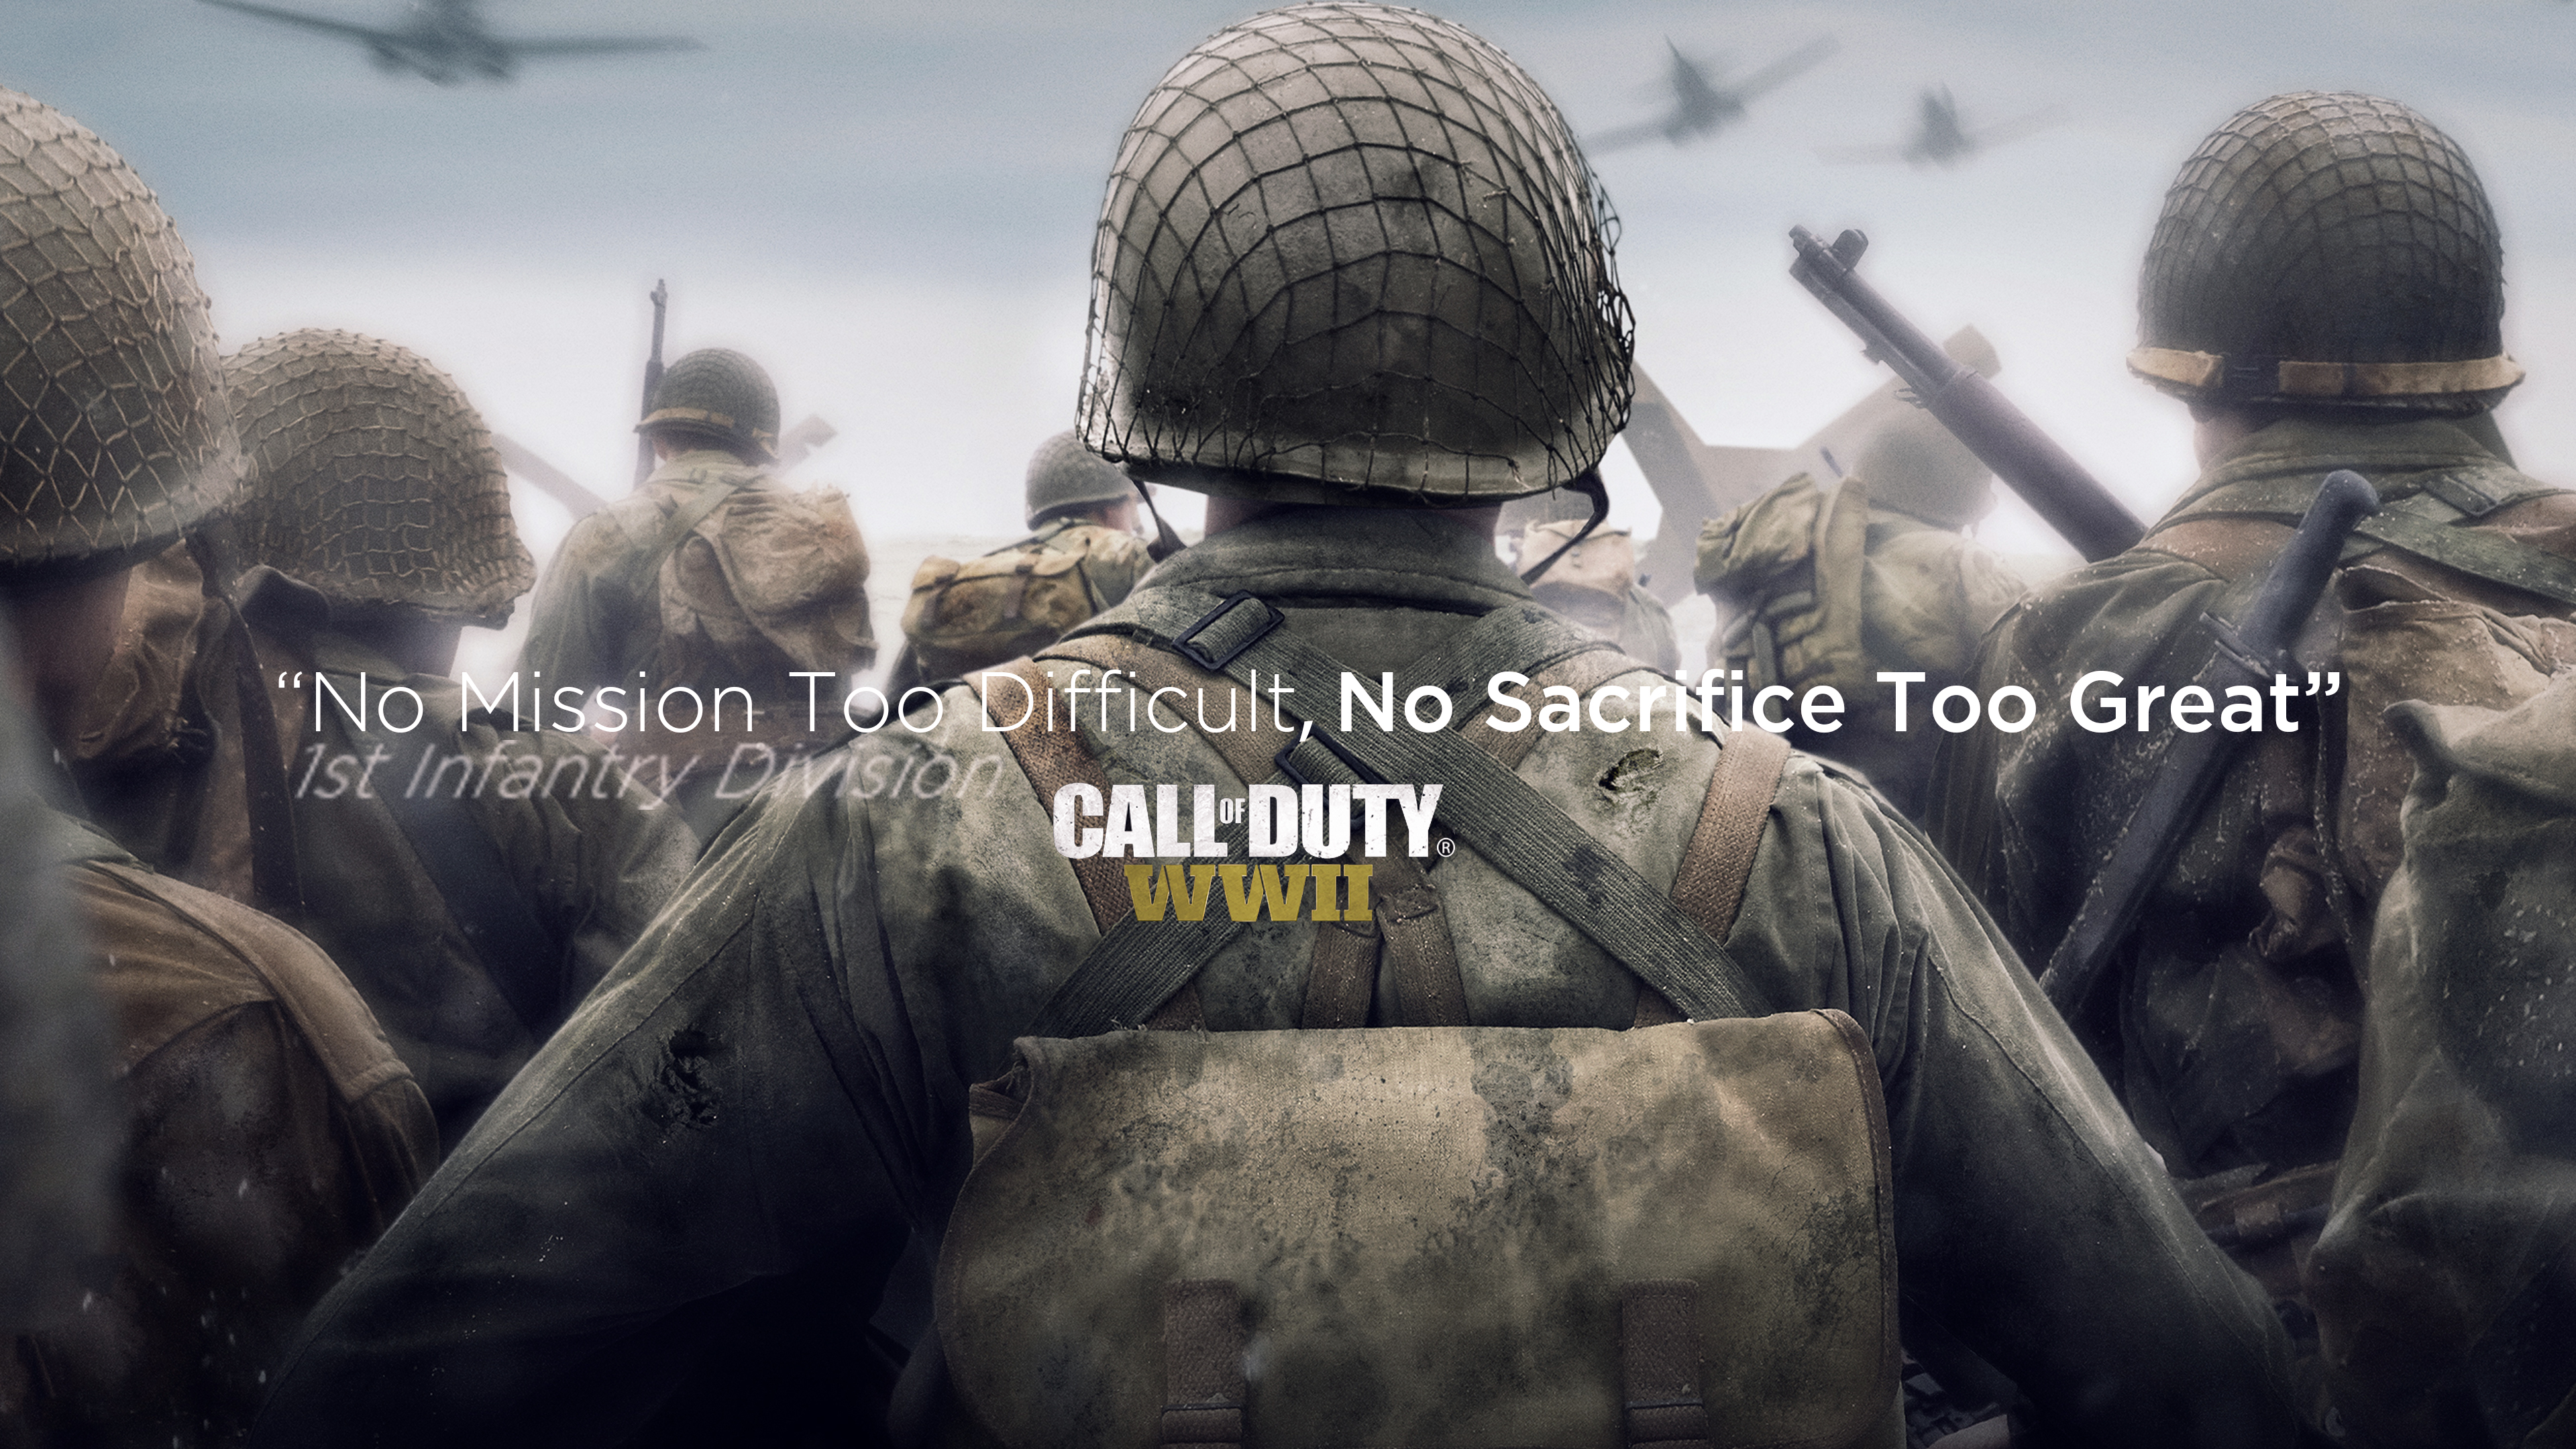 Video Game Call of Duty: WWII HD Wallpaper | Background Image